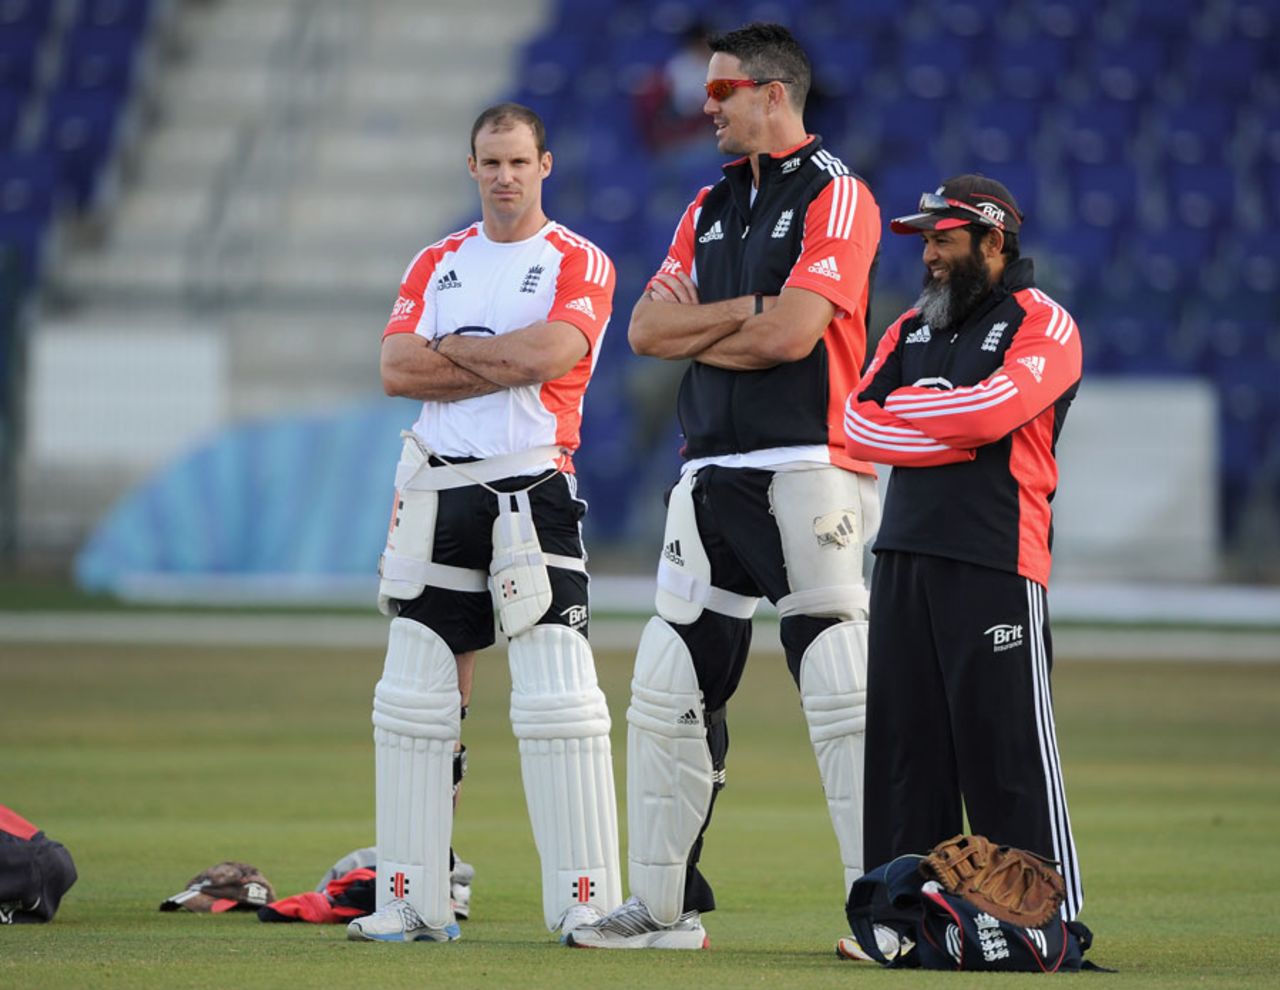 Andrew Strauss, Kevin Pietersen and Mushtaq Ahmed discuss England's net session, Abu Dhabi, January, 24, 2012